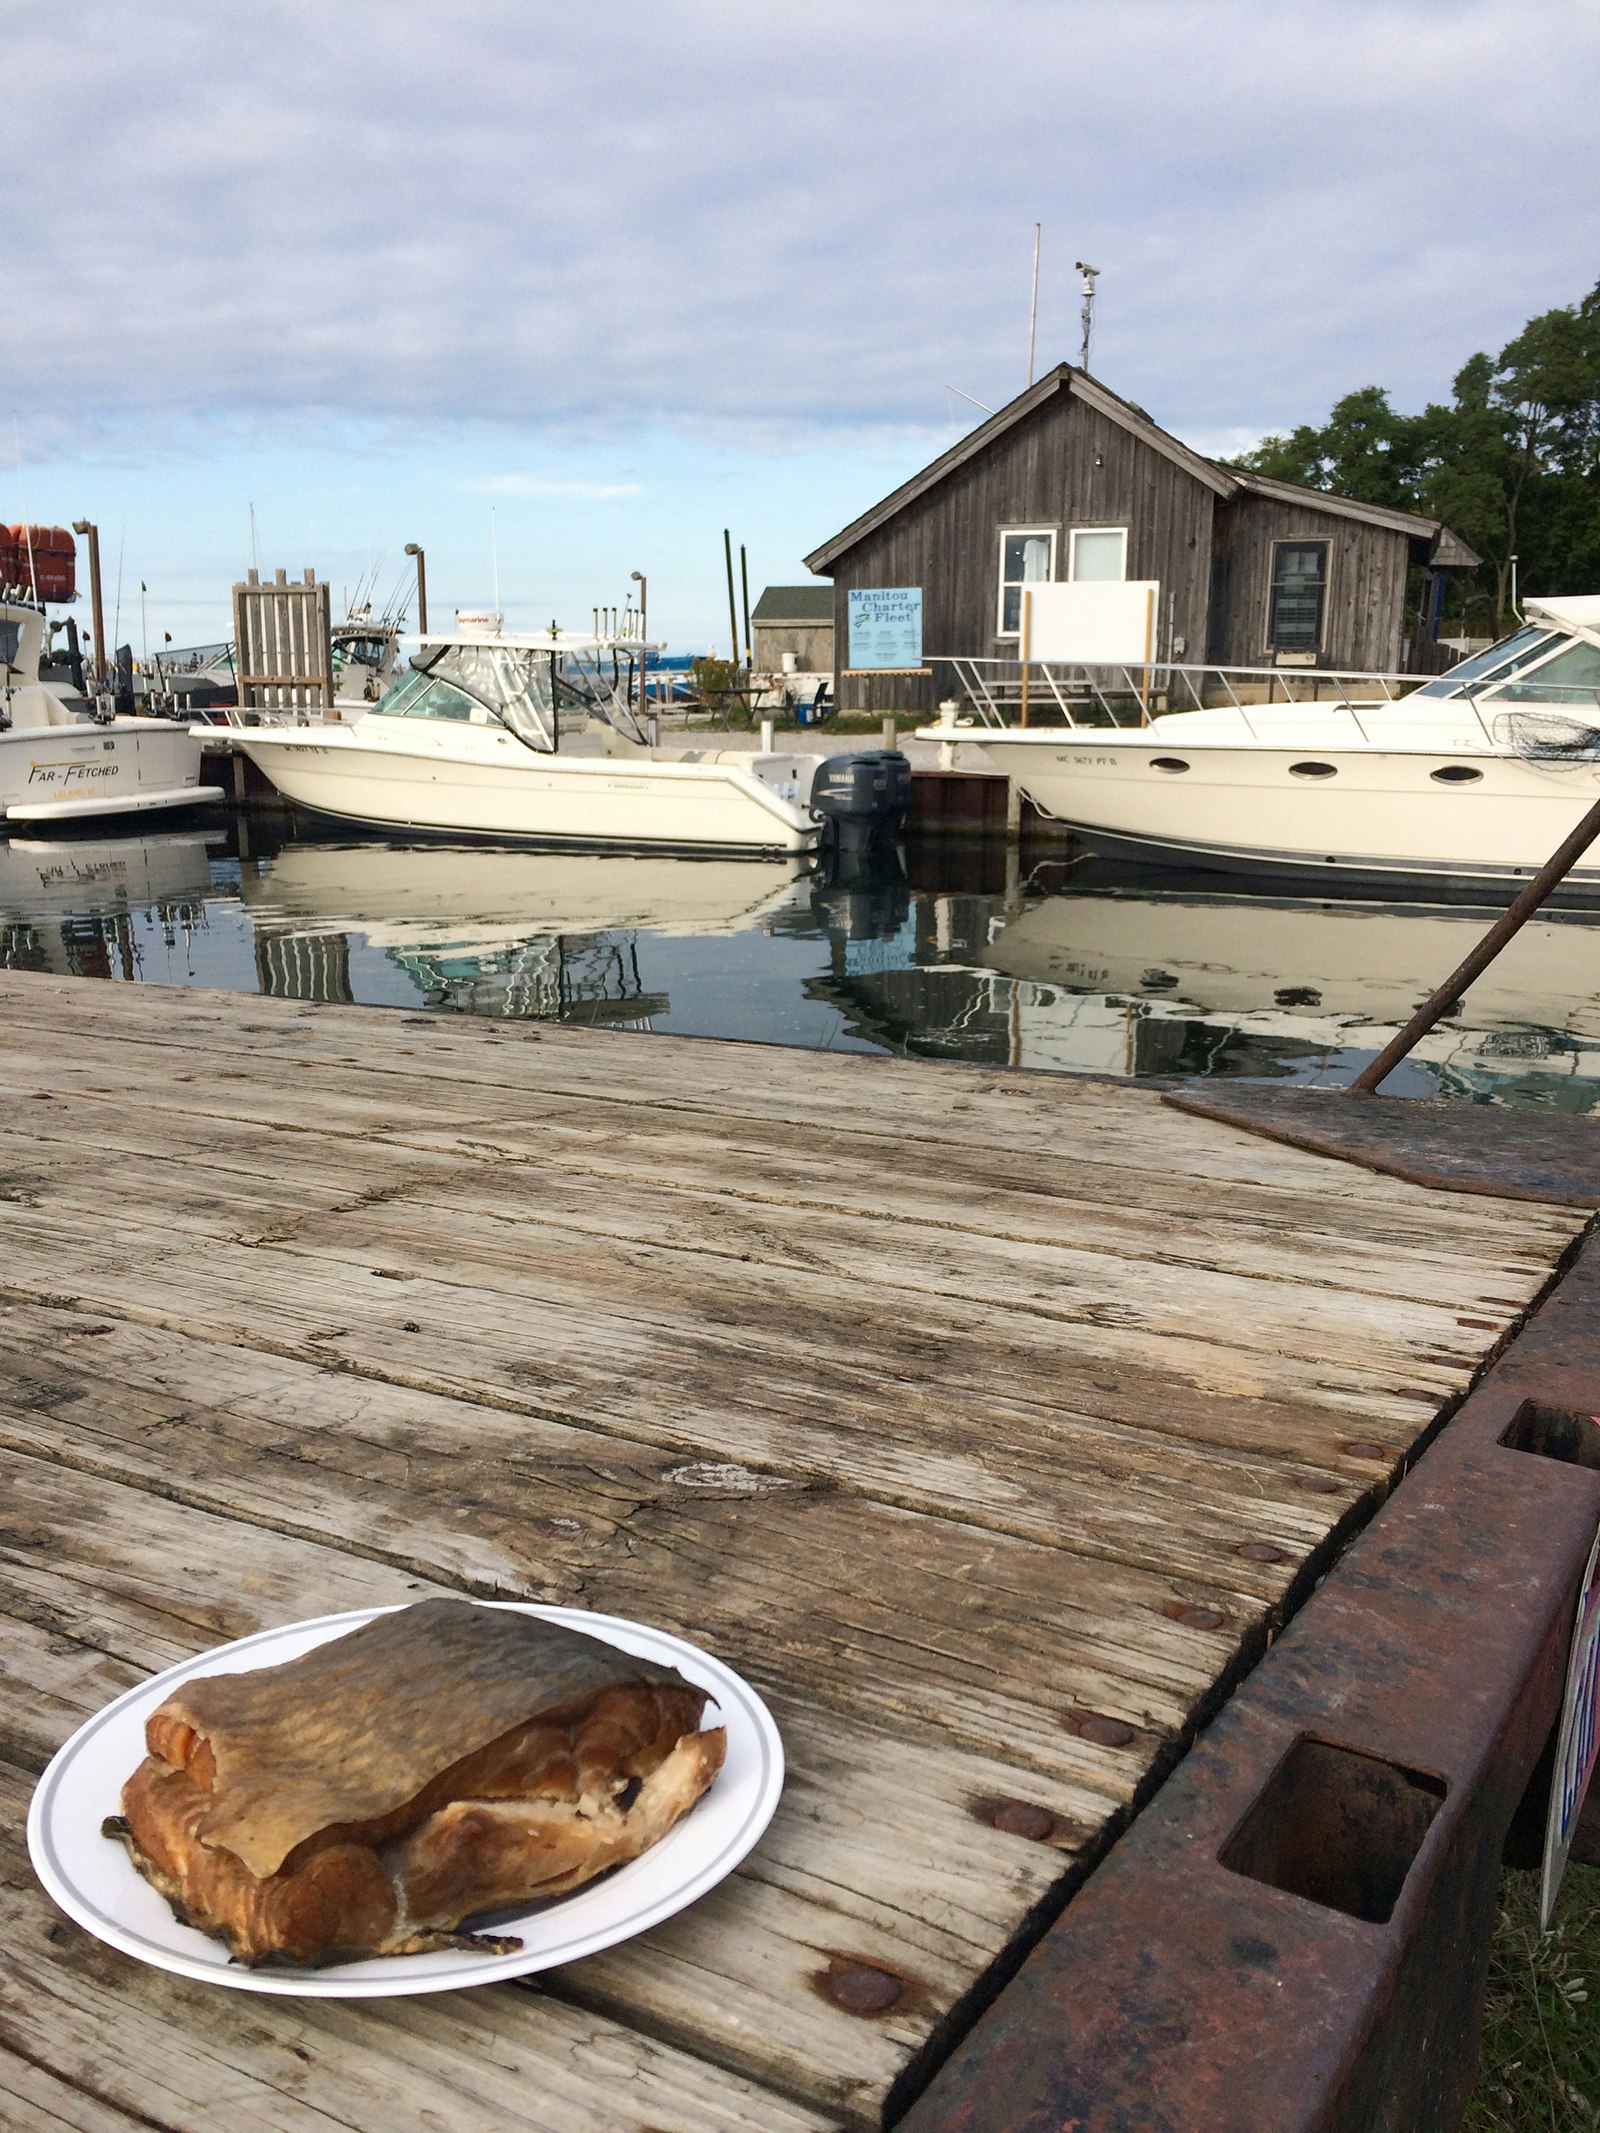 A plate of smoked fish sits on a dock with boats and fishing shanties in the background